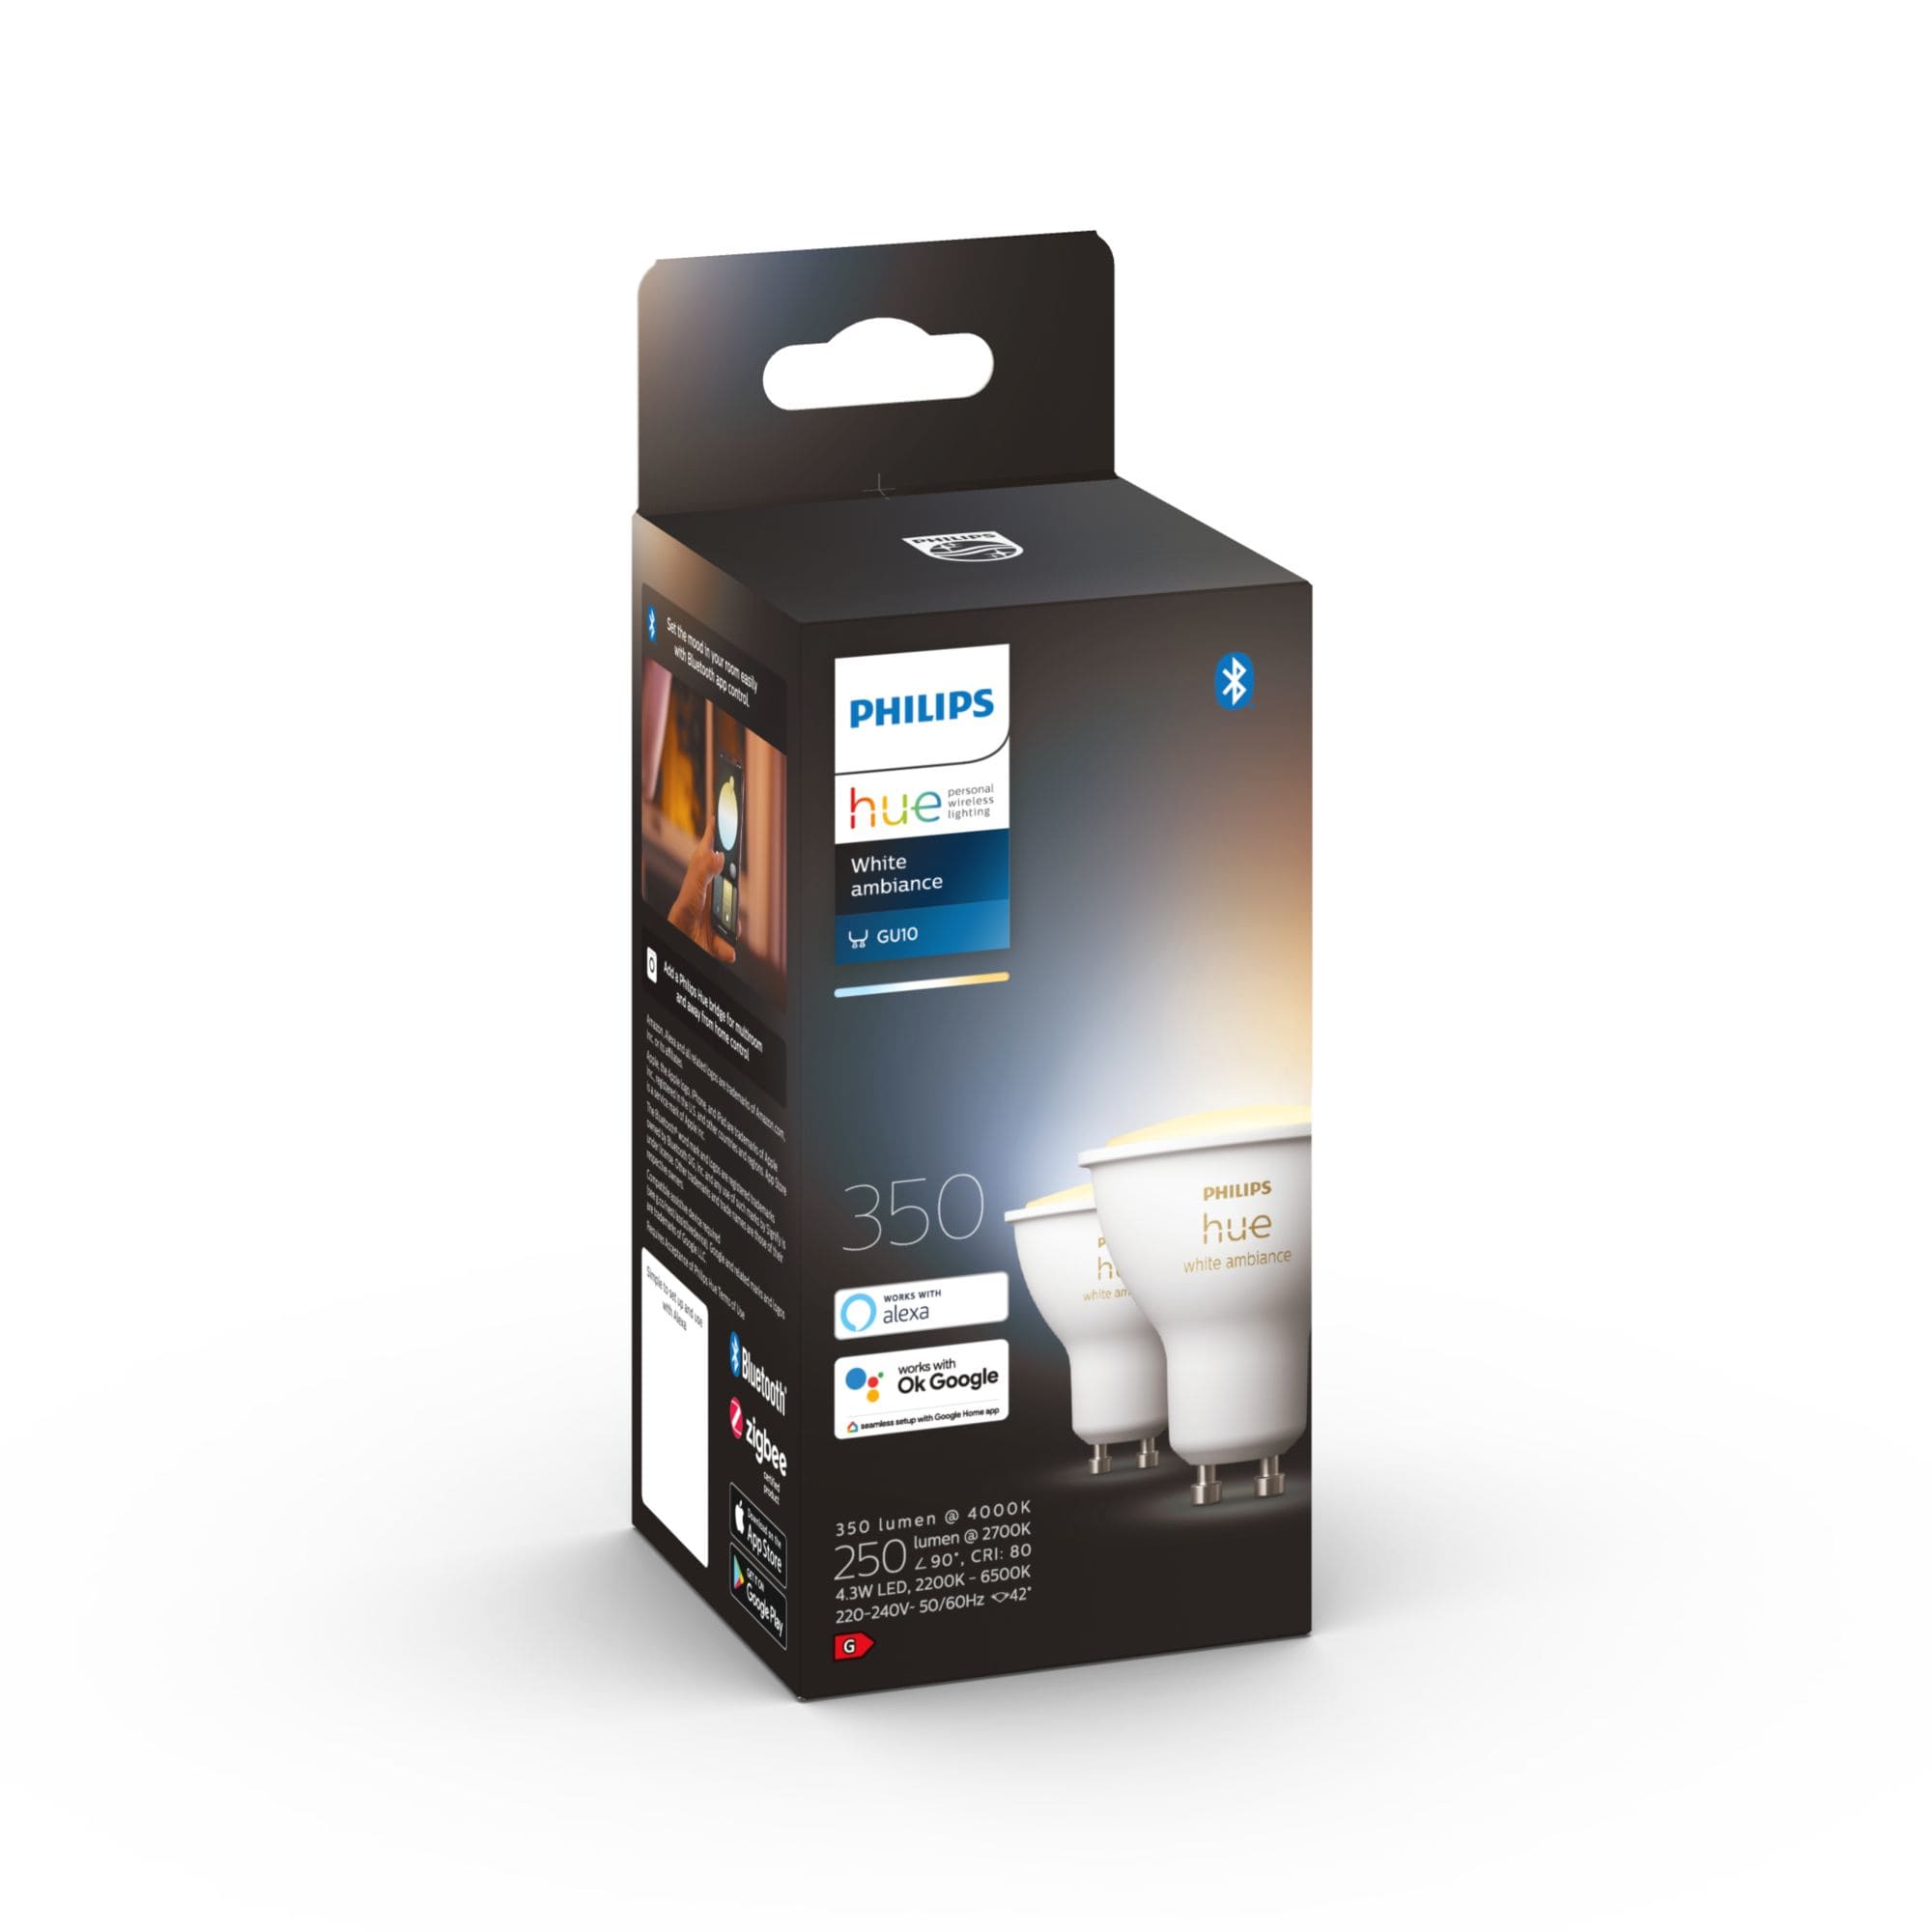 Philips Hue GU10 Spot White Ambiance Duo Pack Perfect Fit 4.3W